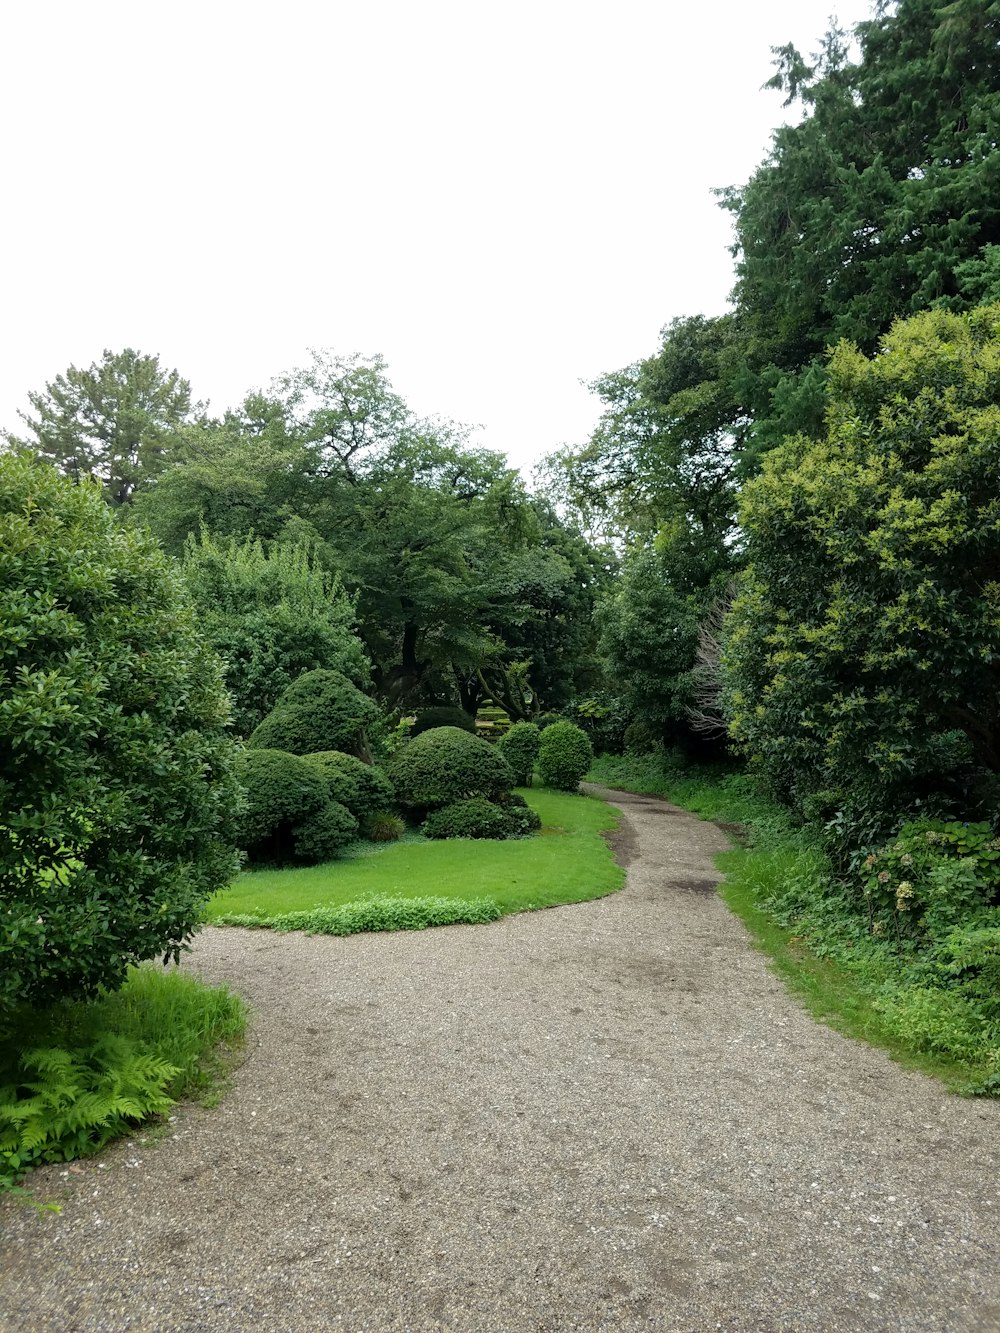 a gravel road surrounded by trees and bushes